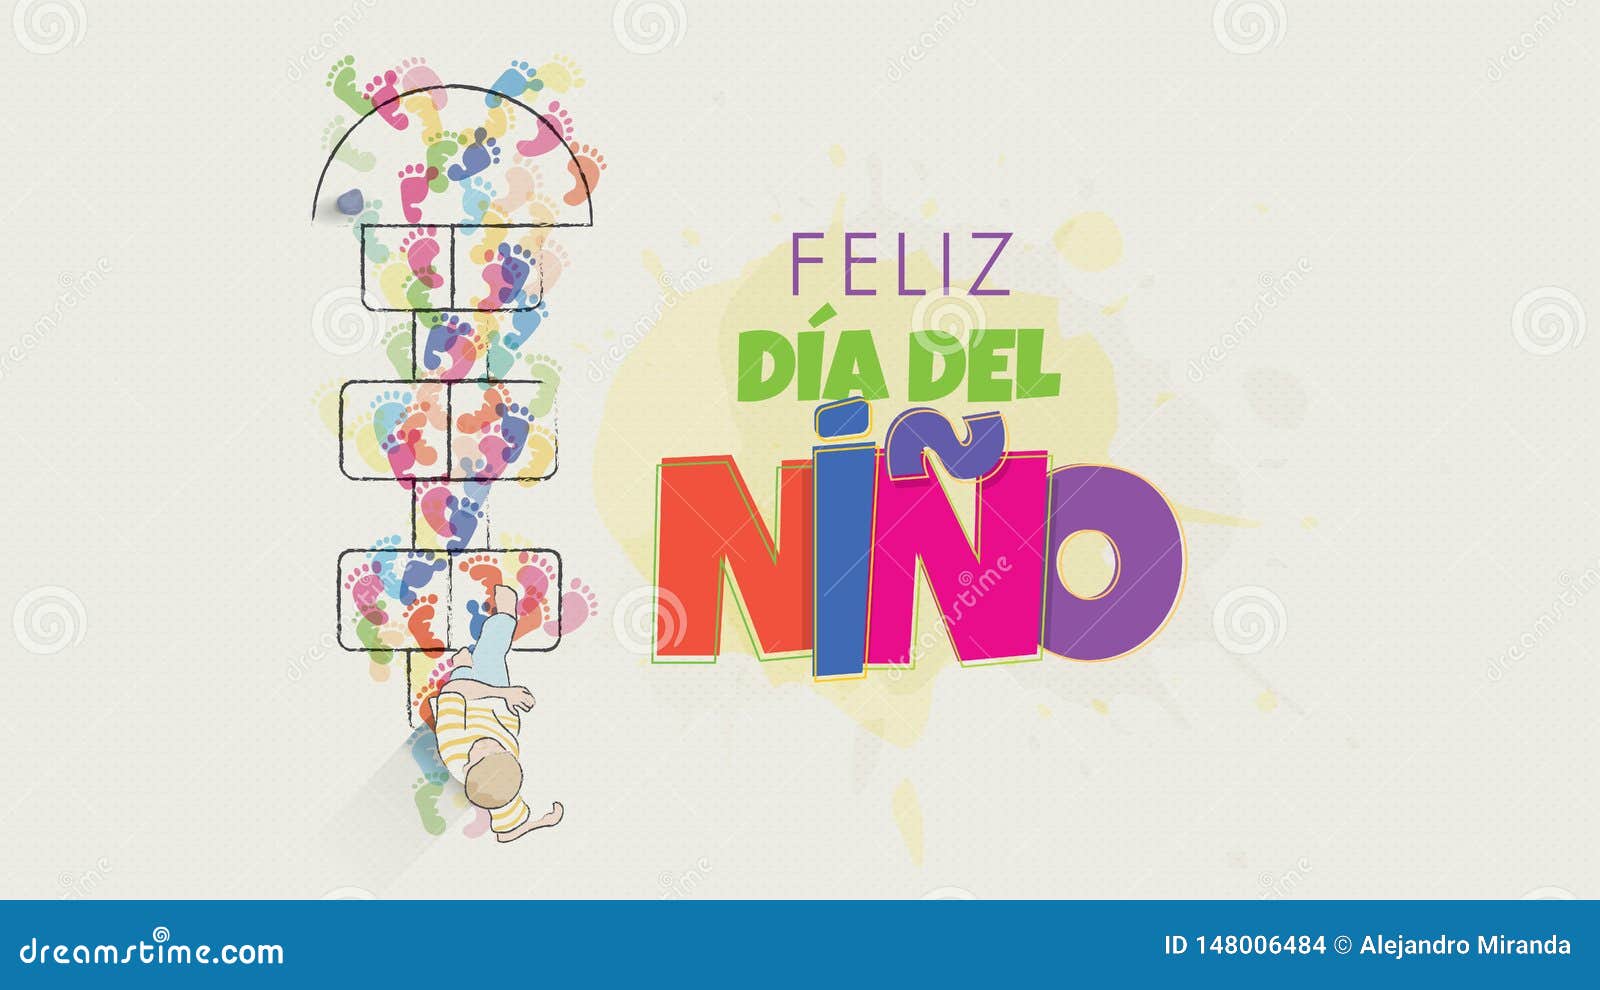 feliz dia del nino greeting card - happy children`s day in spanish language. child`s drawing seen from above starting to jump